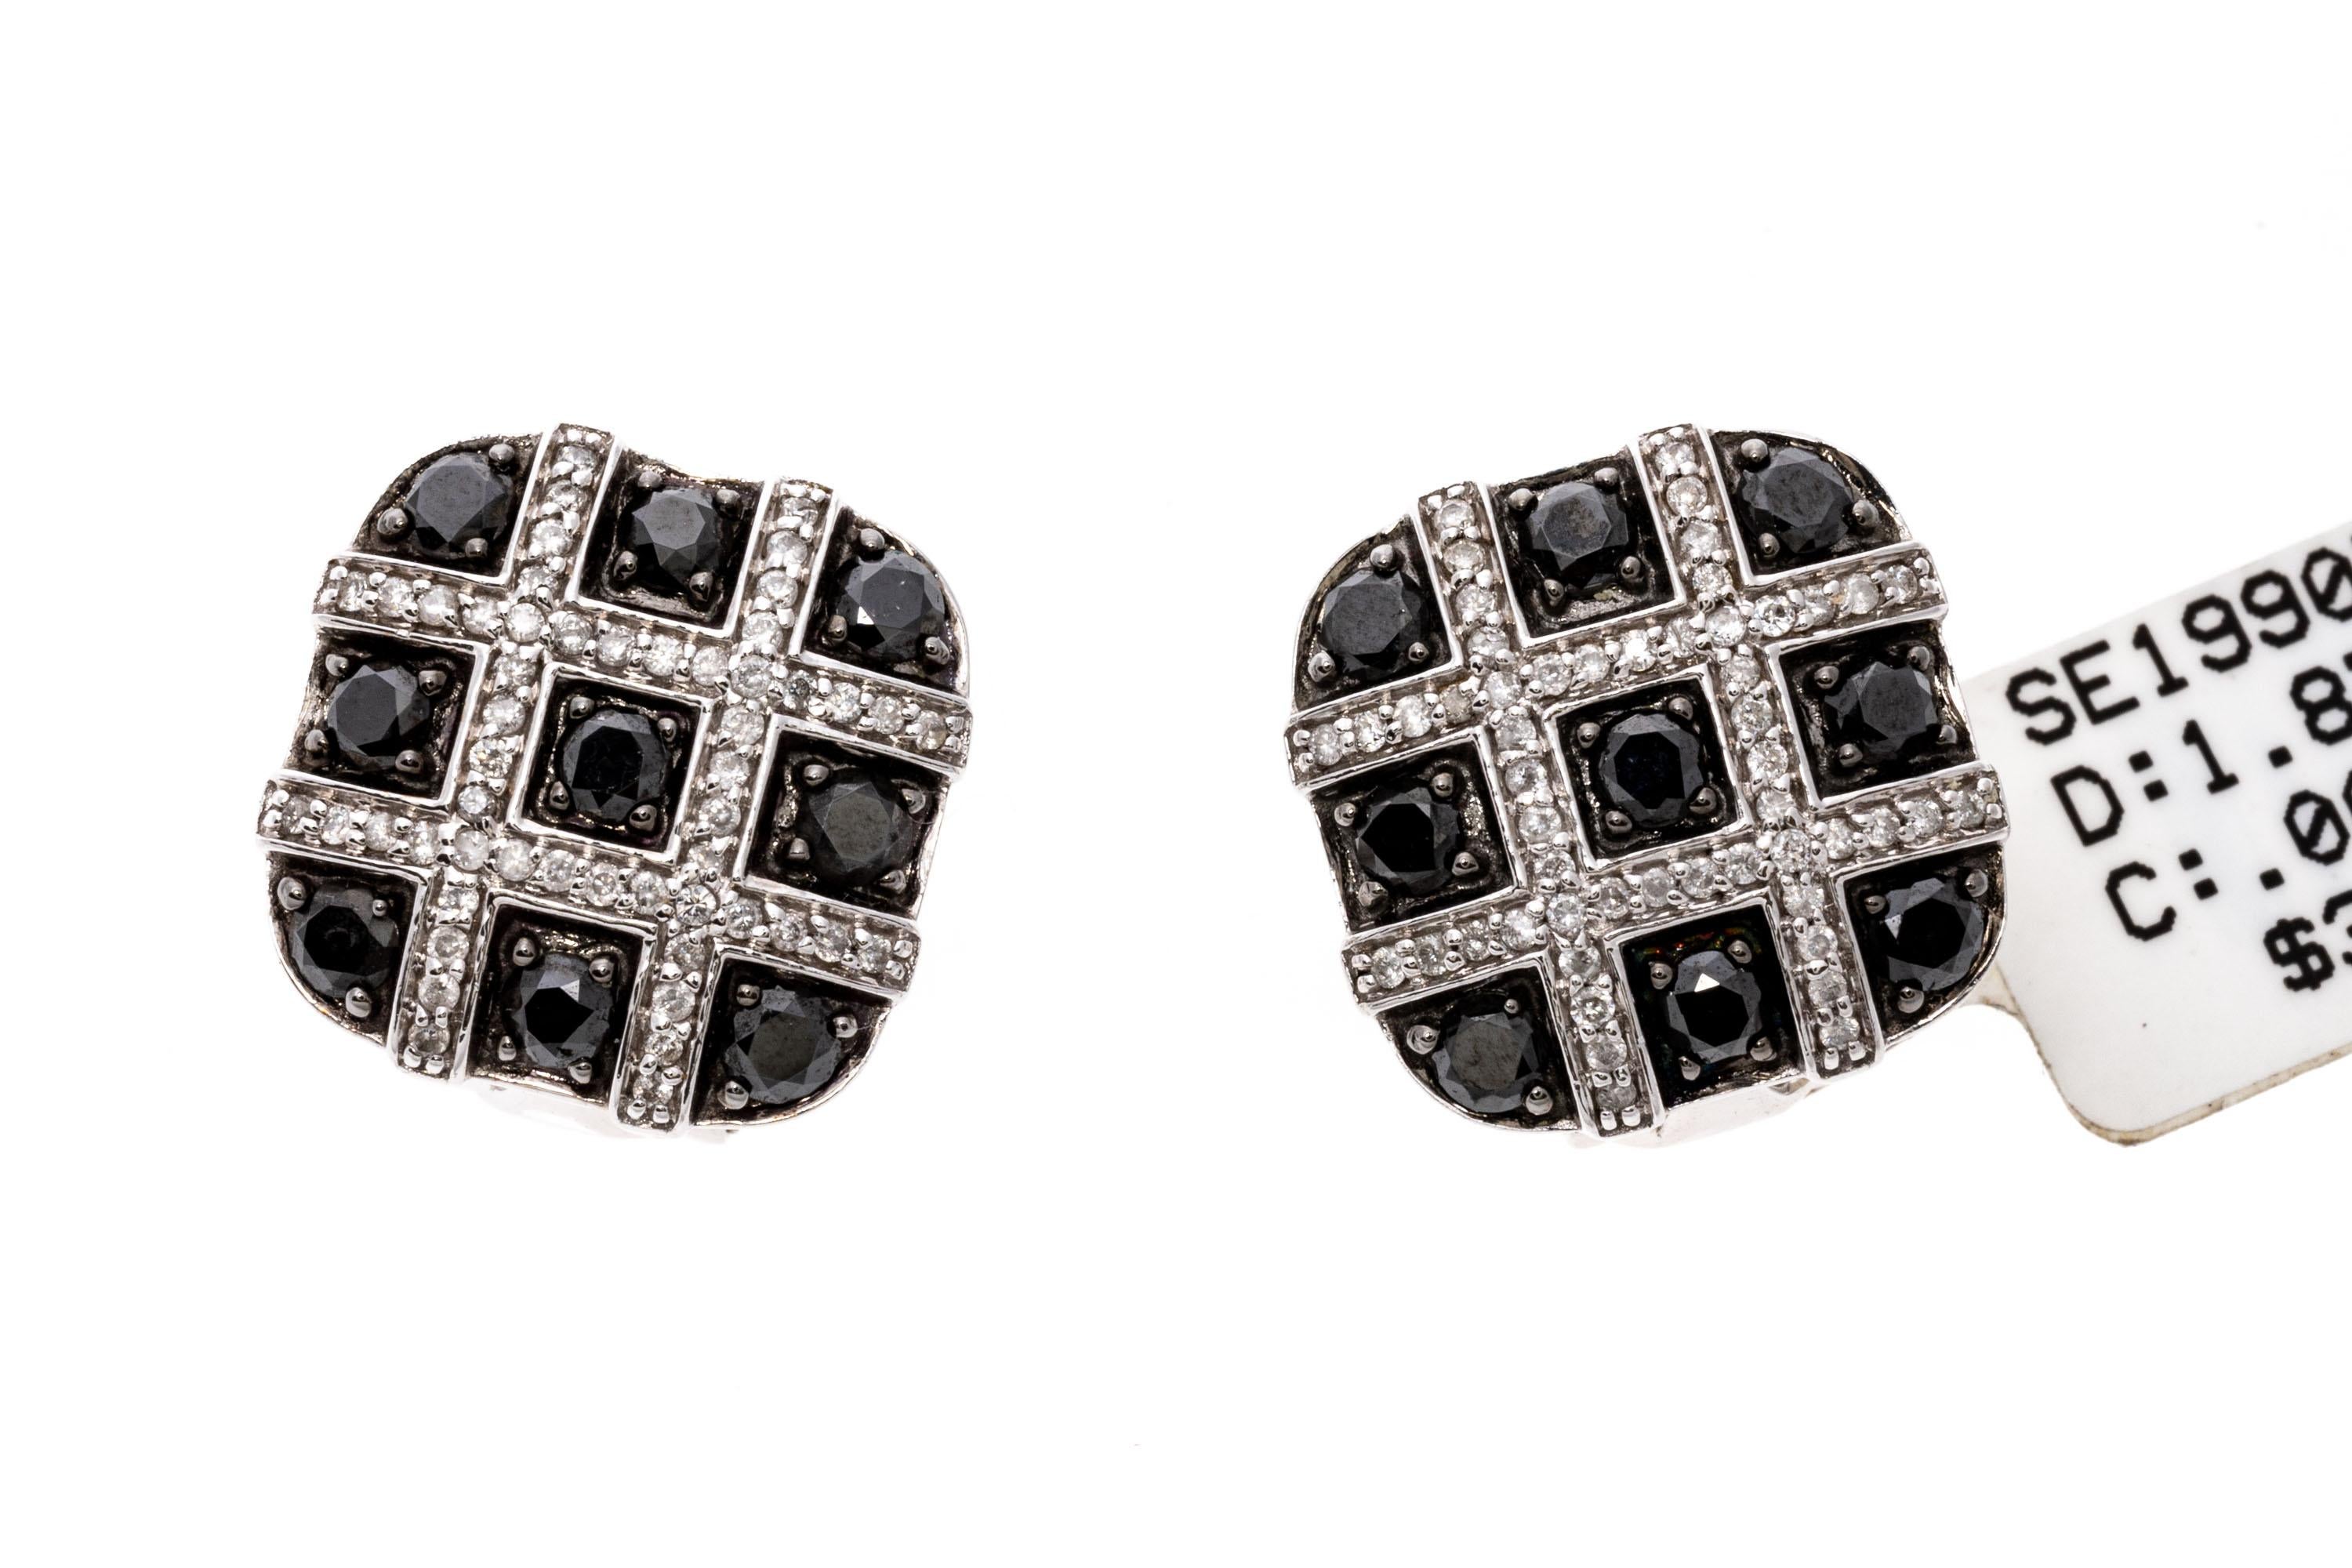 14k White Gold Sophisticated Black And White Diamond Cushion Earrings, 1.87 TCW.
These sophisticated earrings are a rounded cushion, button style with prong set round faceted black diamonds set in between crisscross bars of round faceted, white